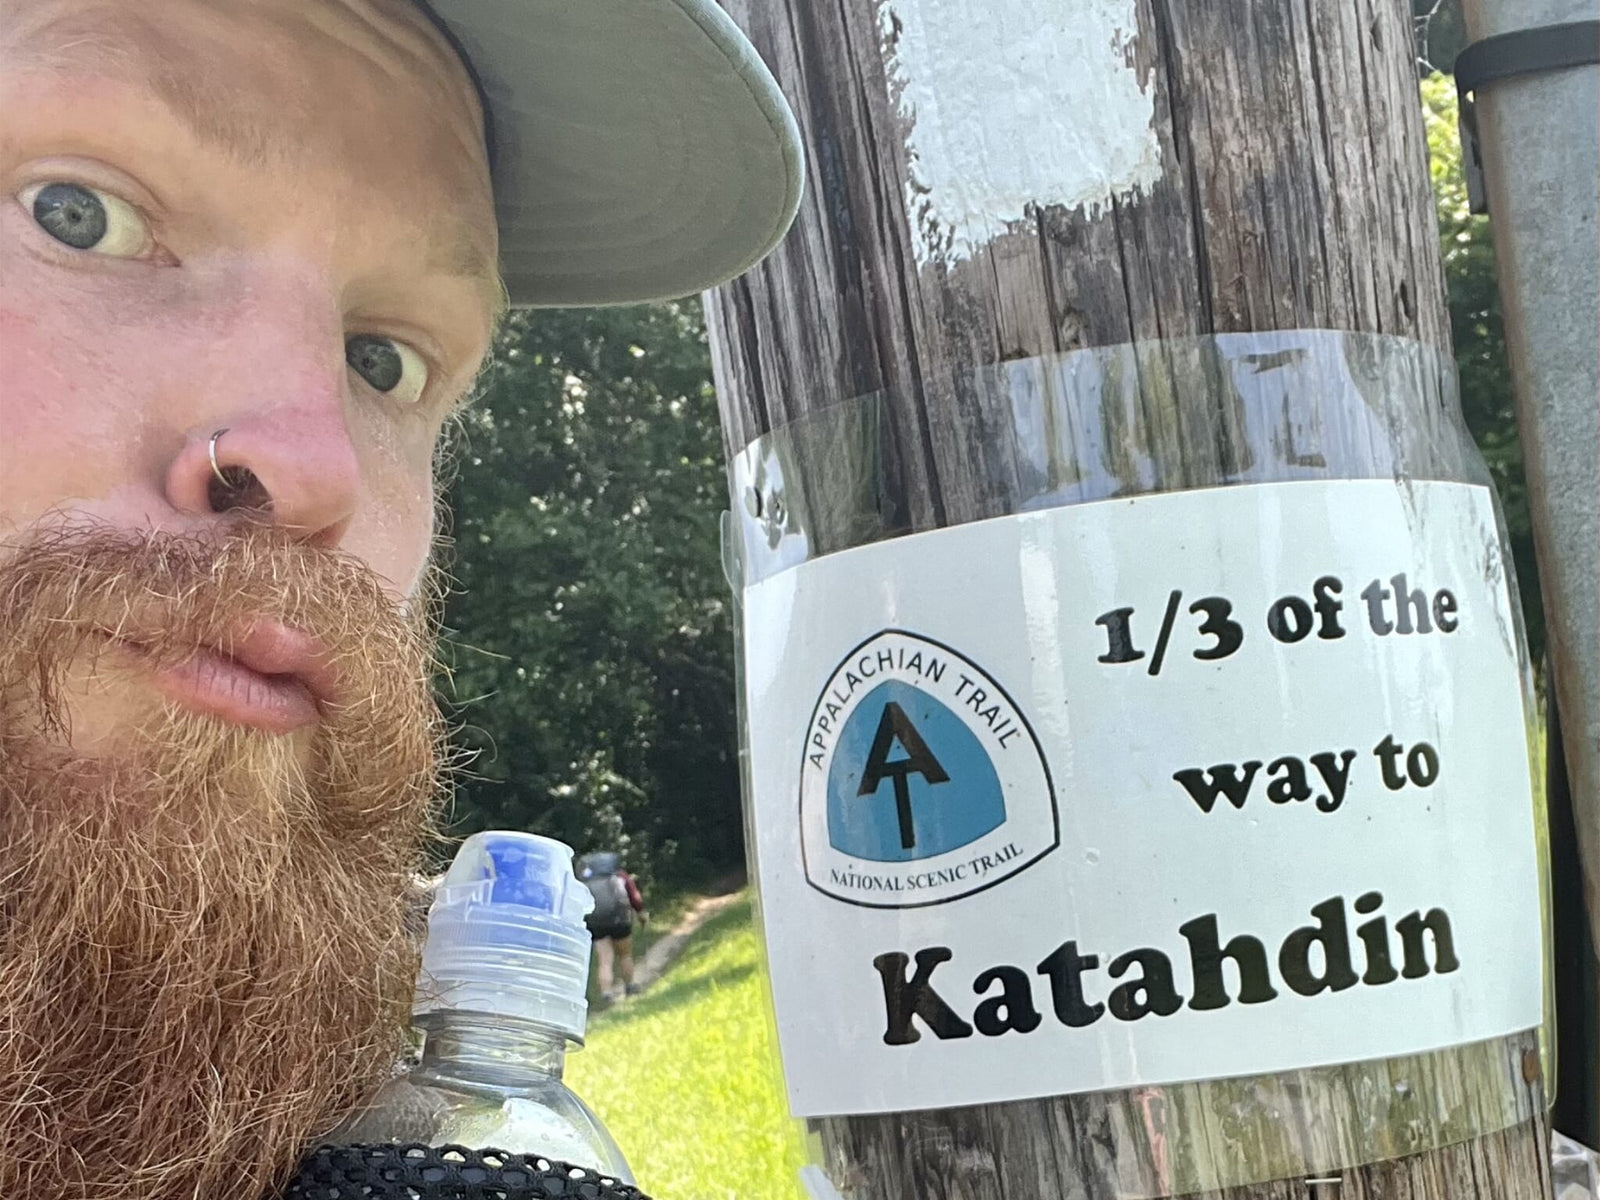 Trail Update: 1/3 of the way there!